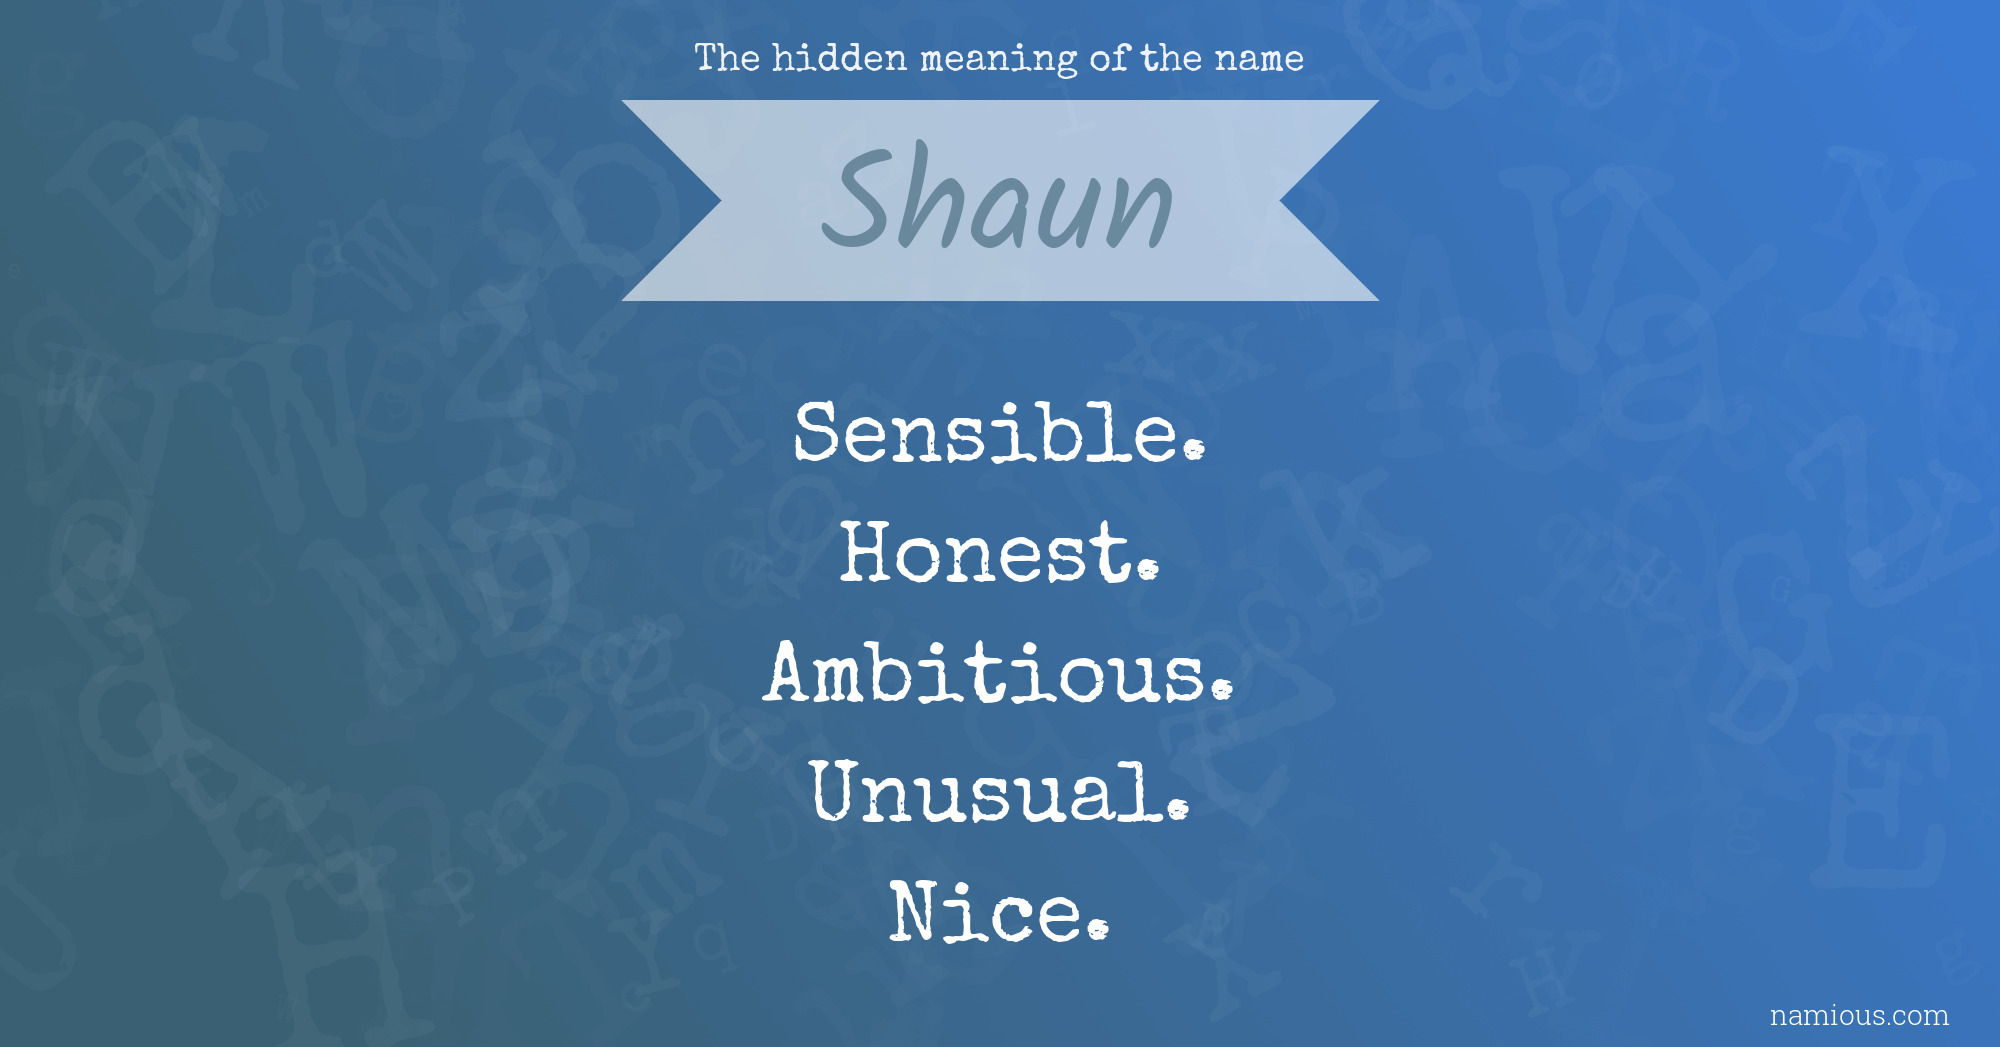 The hidden meaning of the name Shaun